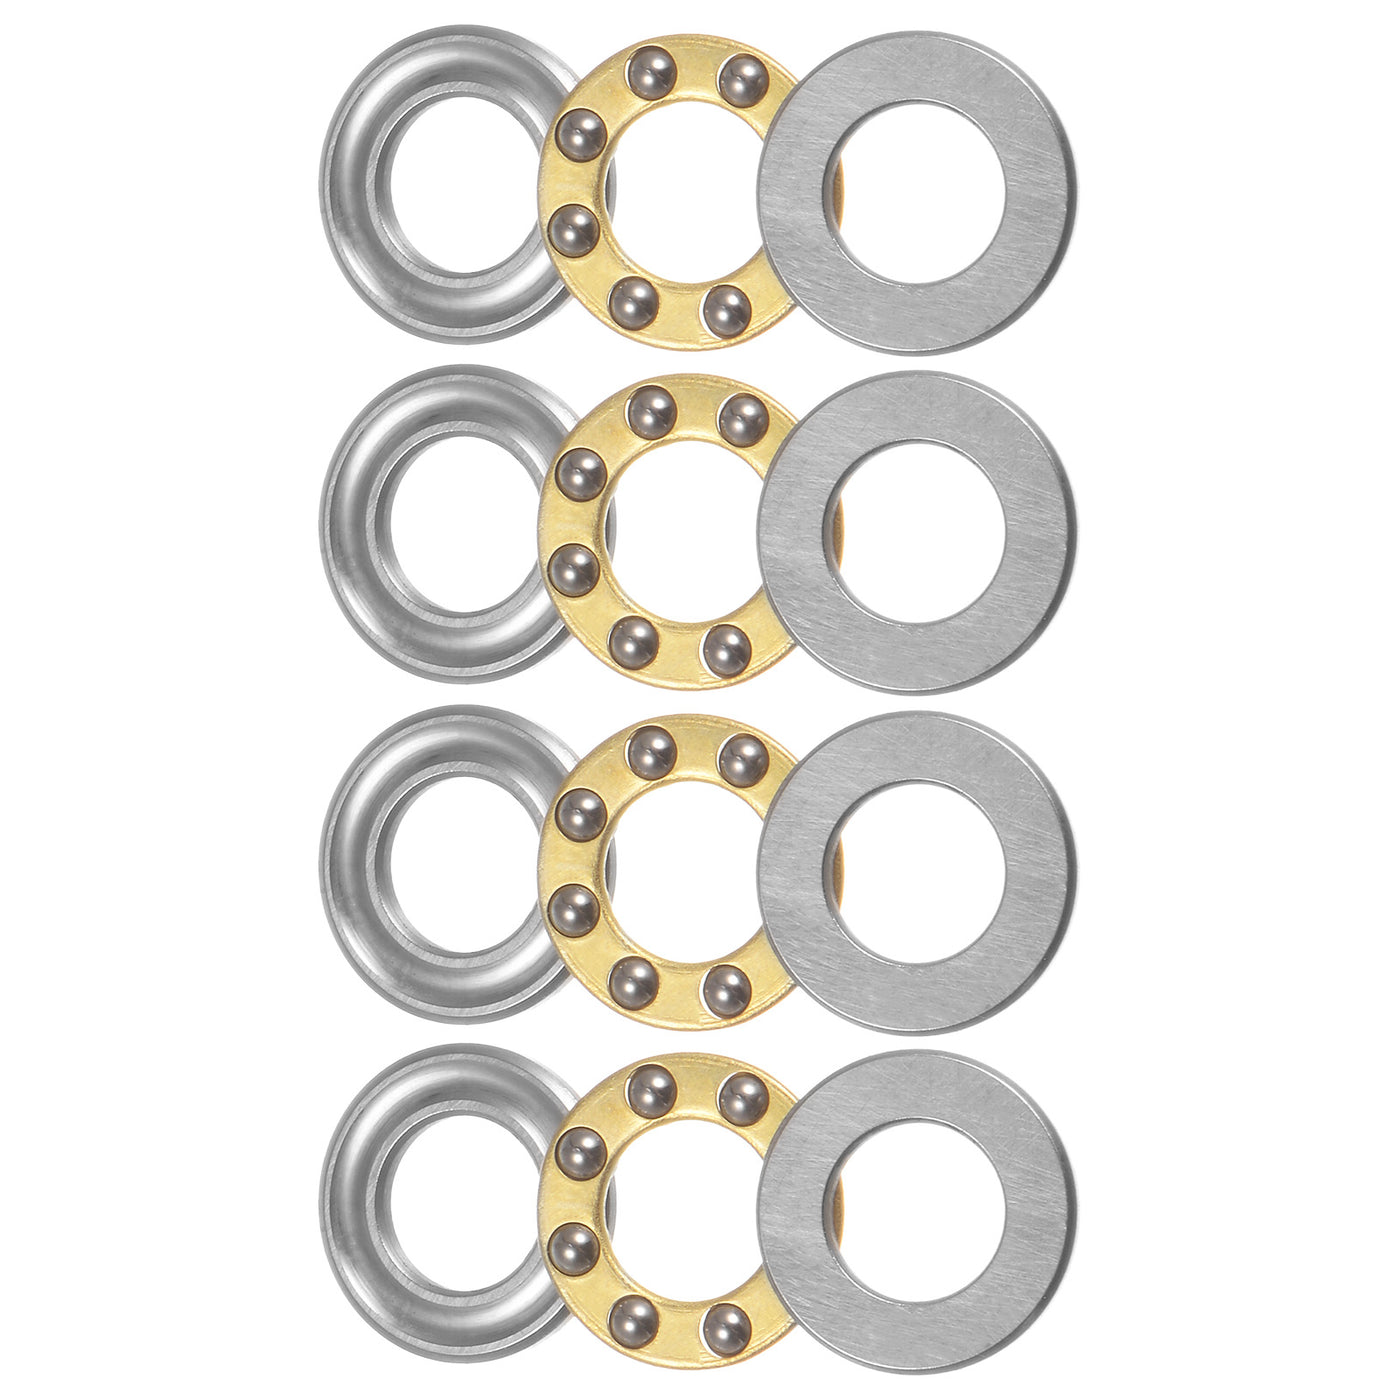 uxcell Uxcell F7-13M Thrust Ball Bearing 7x13x5mm Brass with Washers ABEC3 4pcs